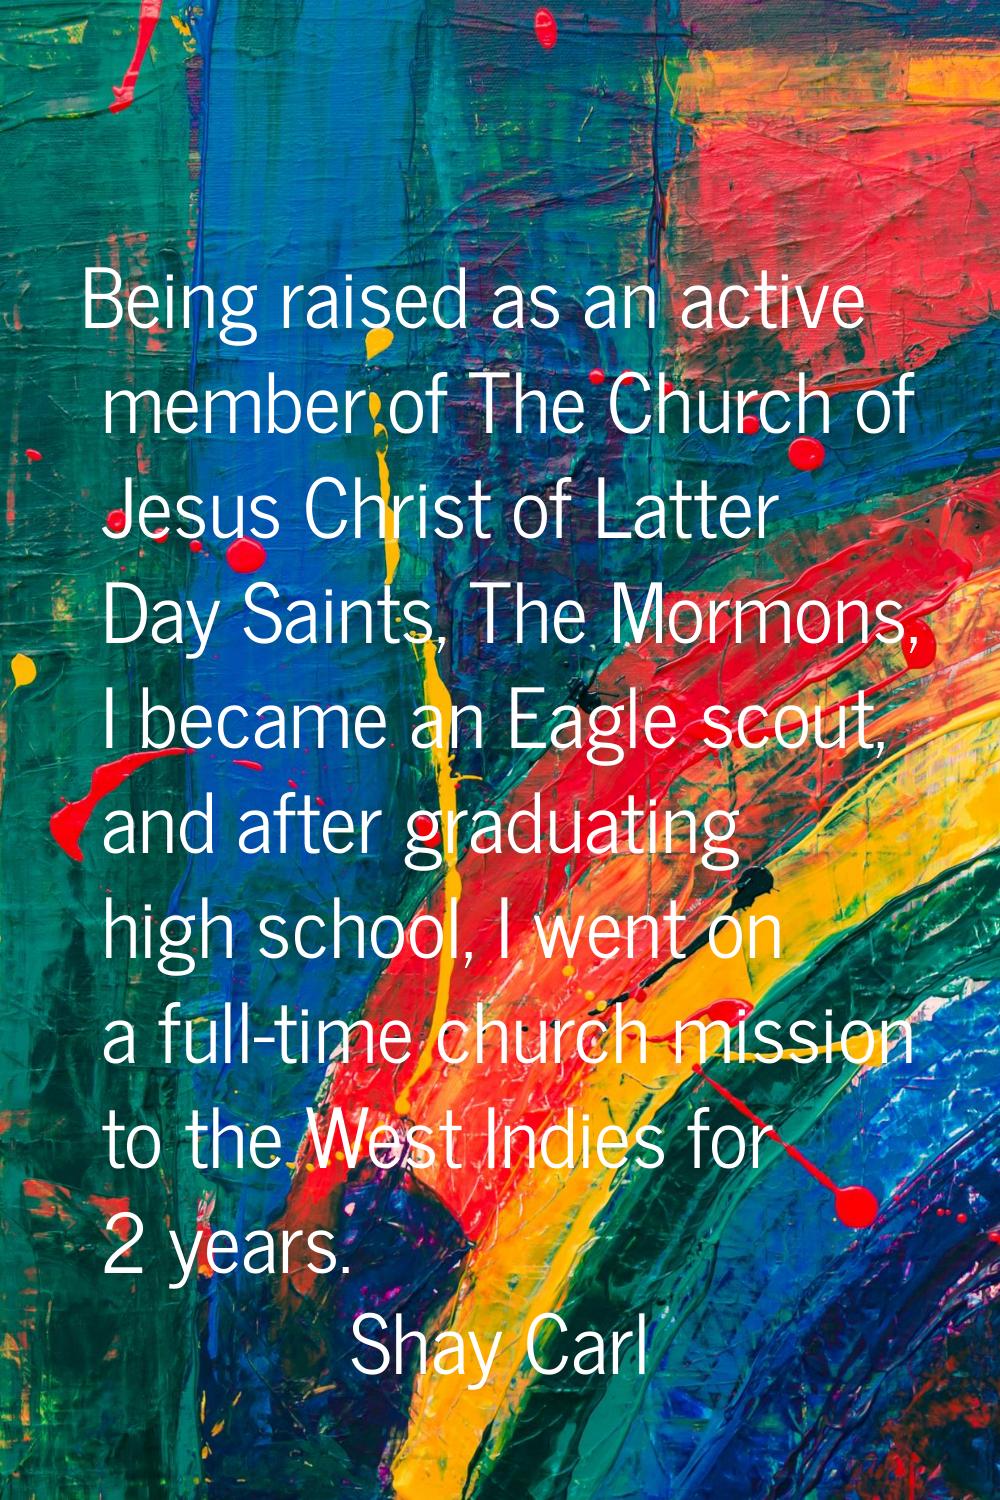 Being raised as an active member of The Church of Jesus Christ of Latter Day Saints, The Mormons, I